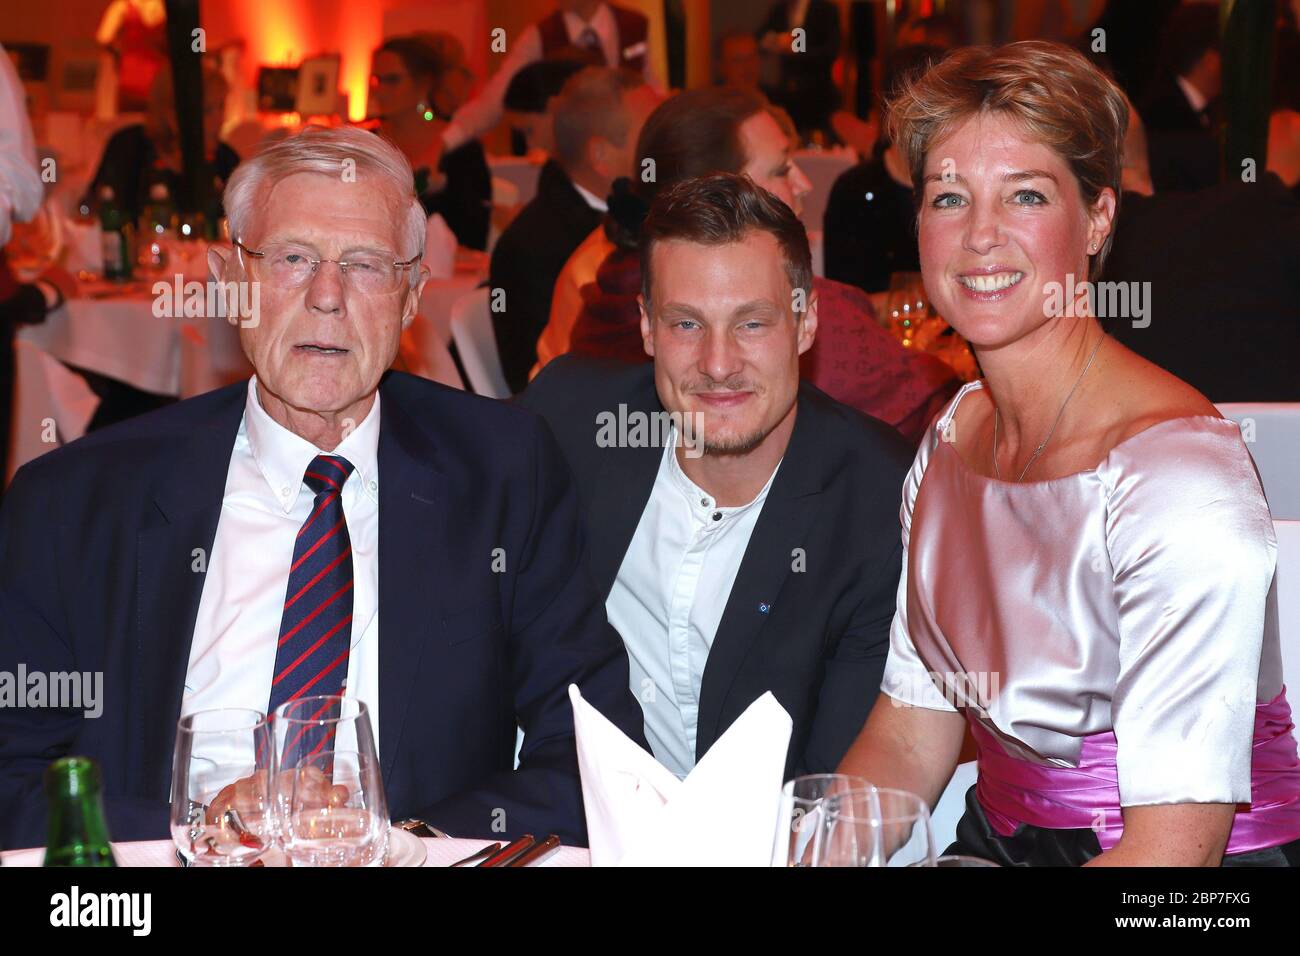 Eugen Block, Marcell Jansen, Christina Block, Night of the Butterflies Carity Ball for the German Muscle Wasting Aid (ex-Ball Papillion) at the Hotel Grand Elyssee, Hamburg, 26.10.2019 Foto Stock